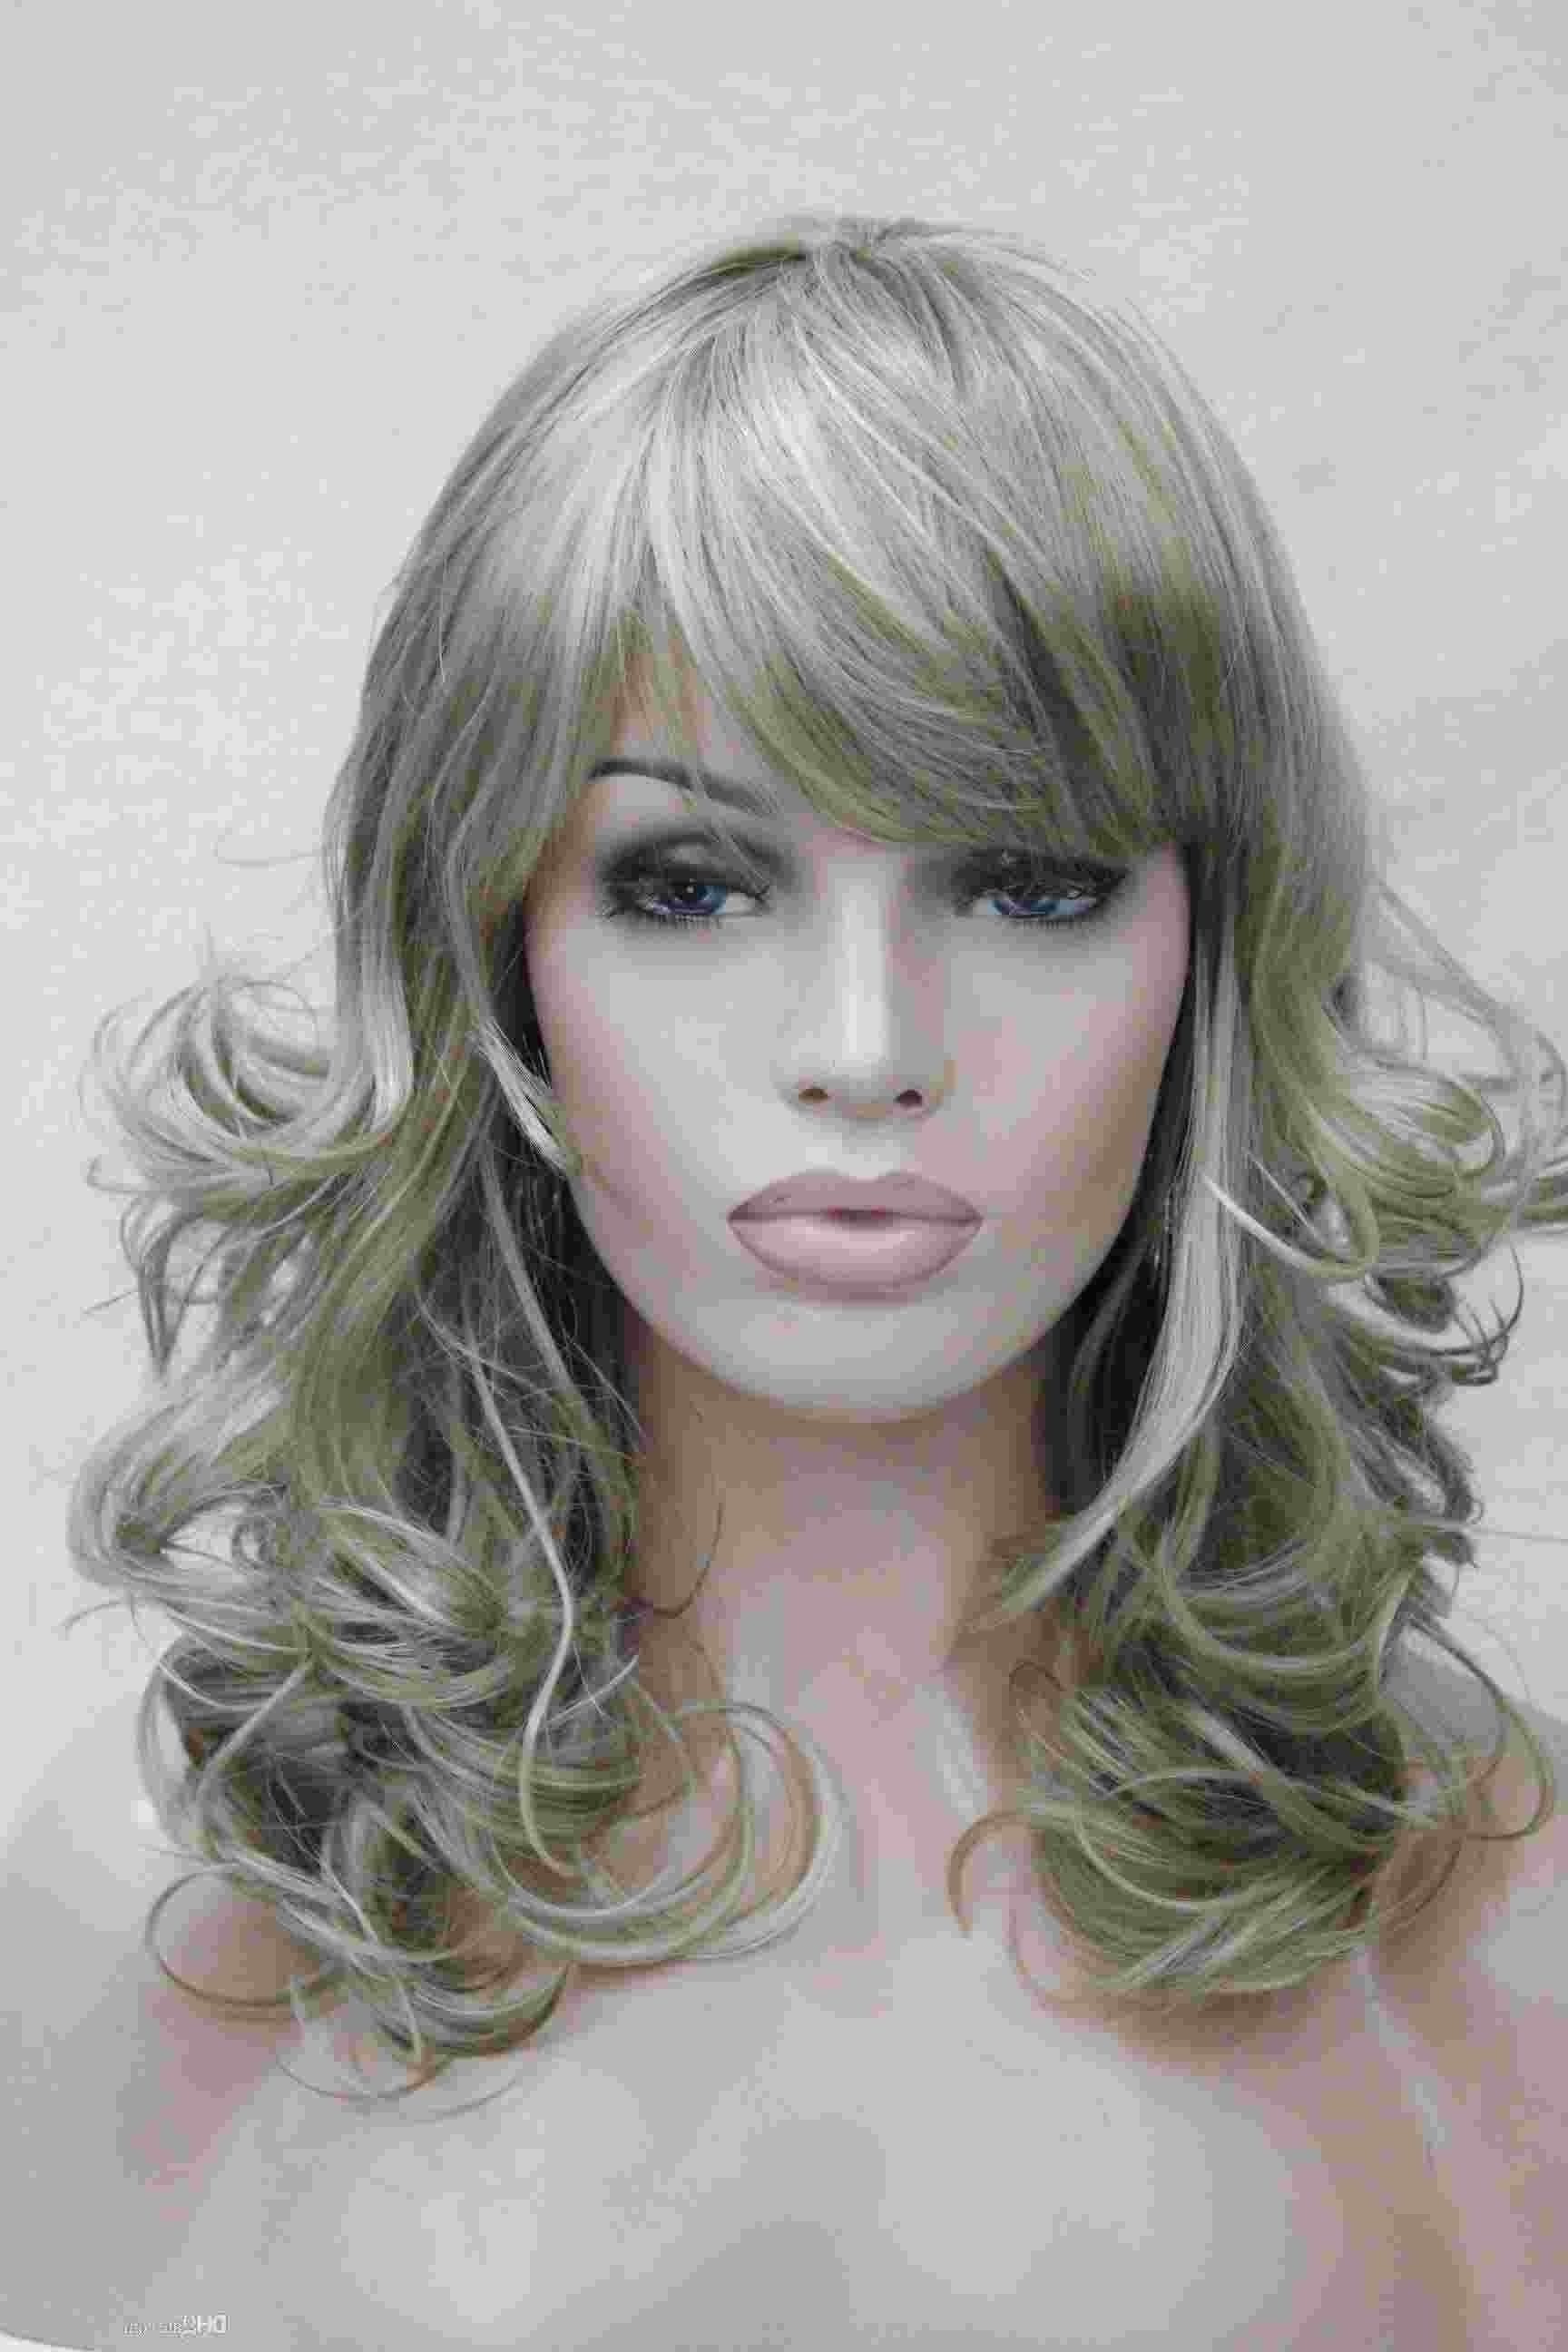 Widely Used Soft Flaxen Blonde Curls Hairstyles Intended For 2017 Charming Fashion Charming Healthy Flaxen With Blonde Medium (View 17 of 20)